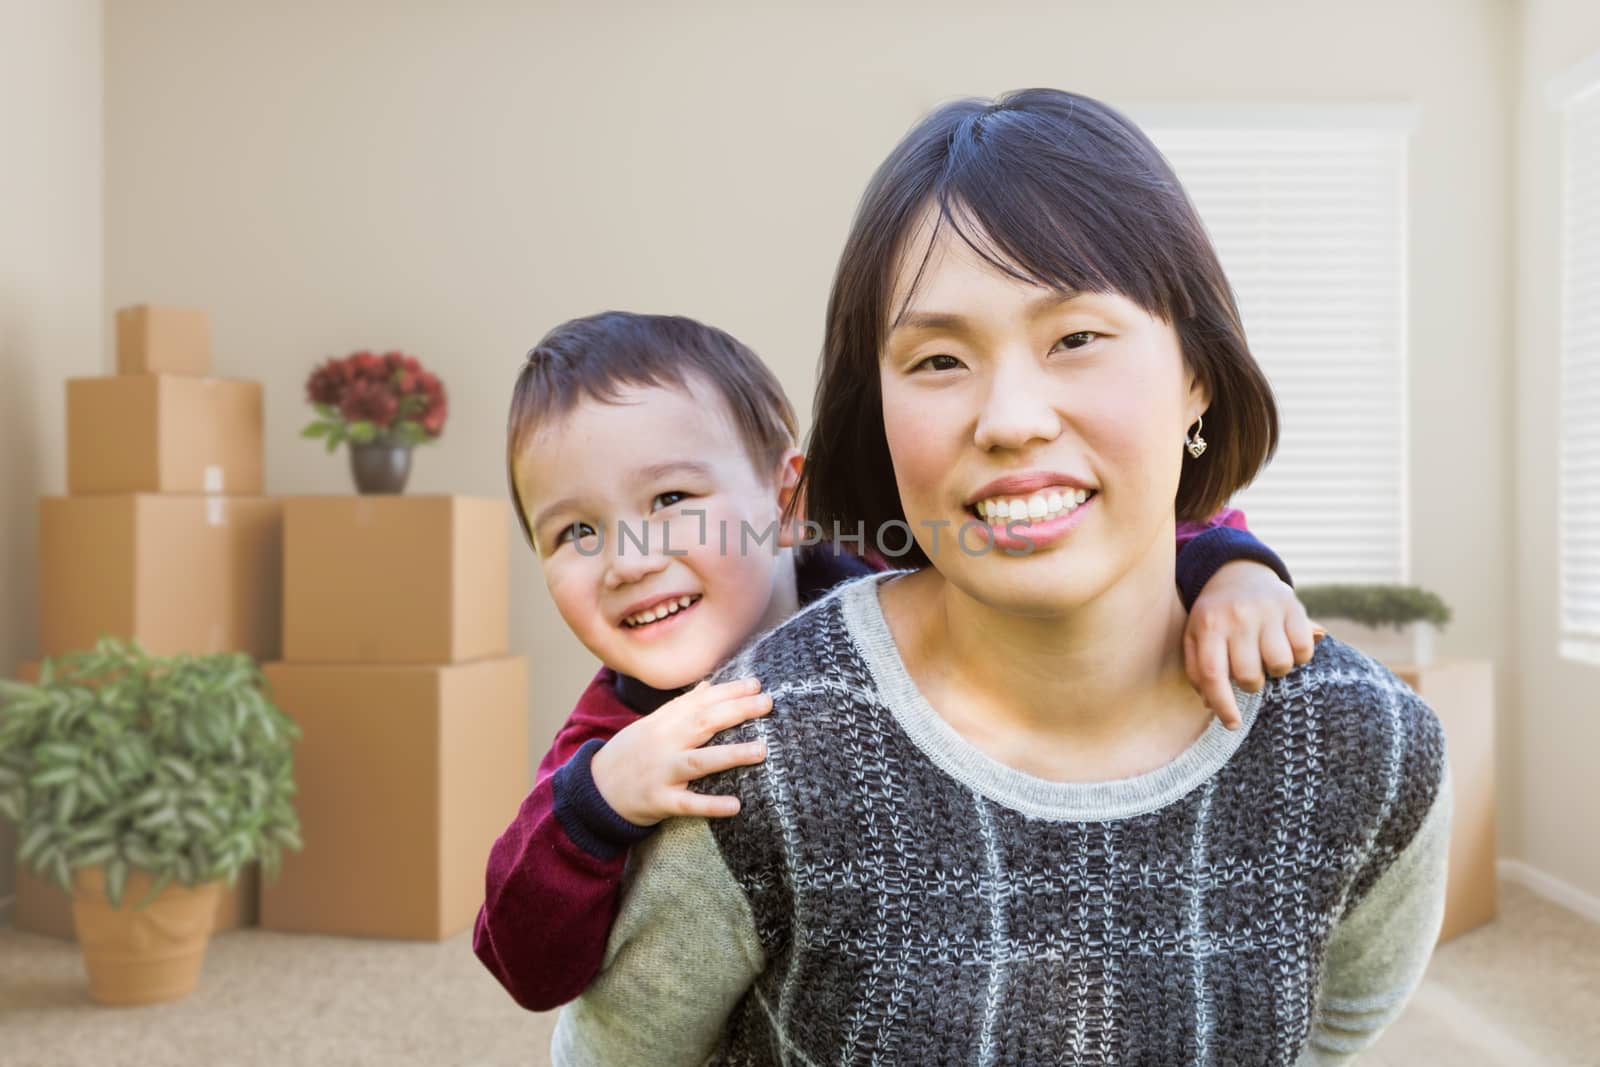 Chinese Mother and Mixed Race Child Inside Empty Room with Moving Boxes and Plants. by Feverpitched